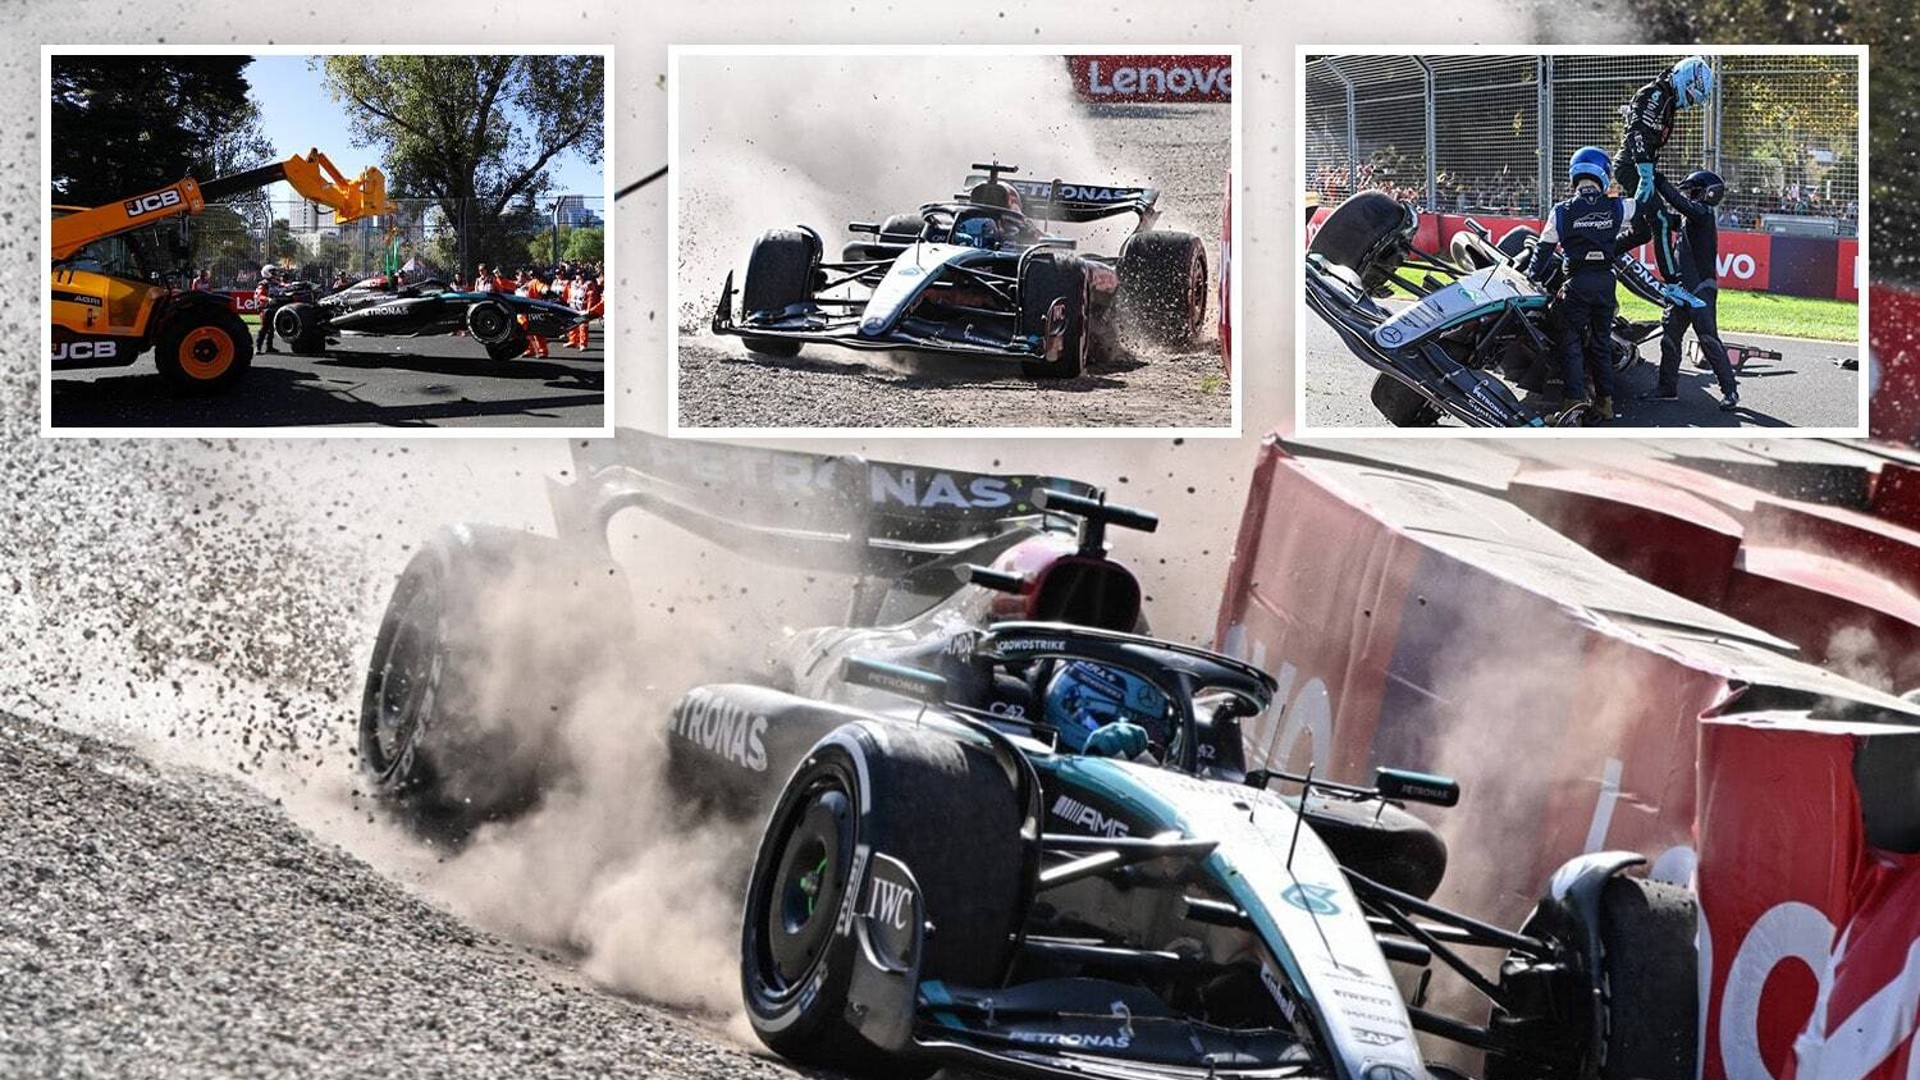 George Russell has MASSIVE crash at Australian Grand Prix after Alonso duel as race chiefs set to launch investigation